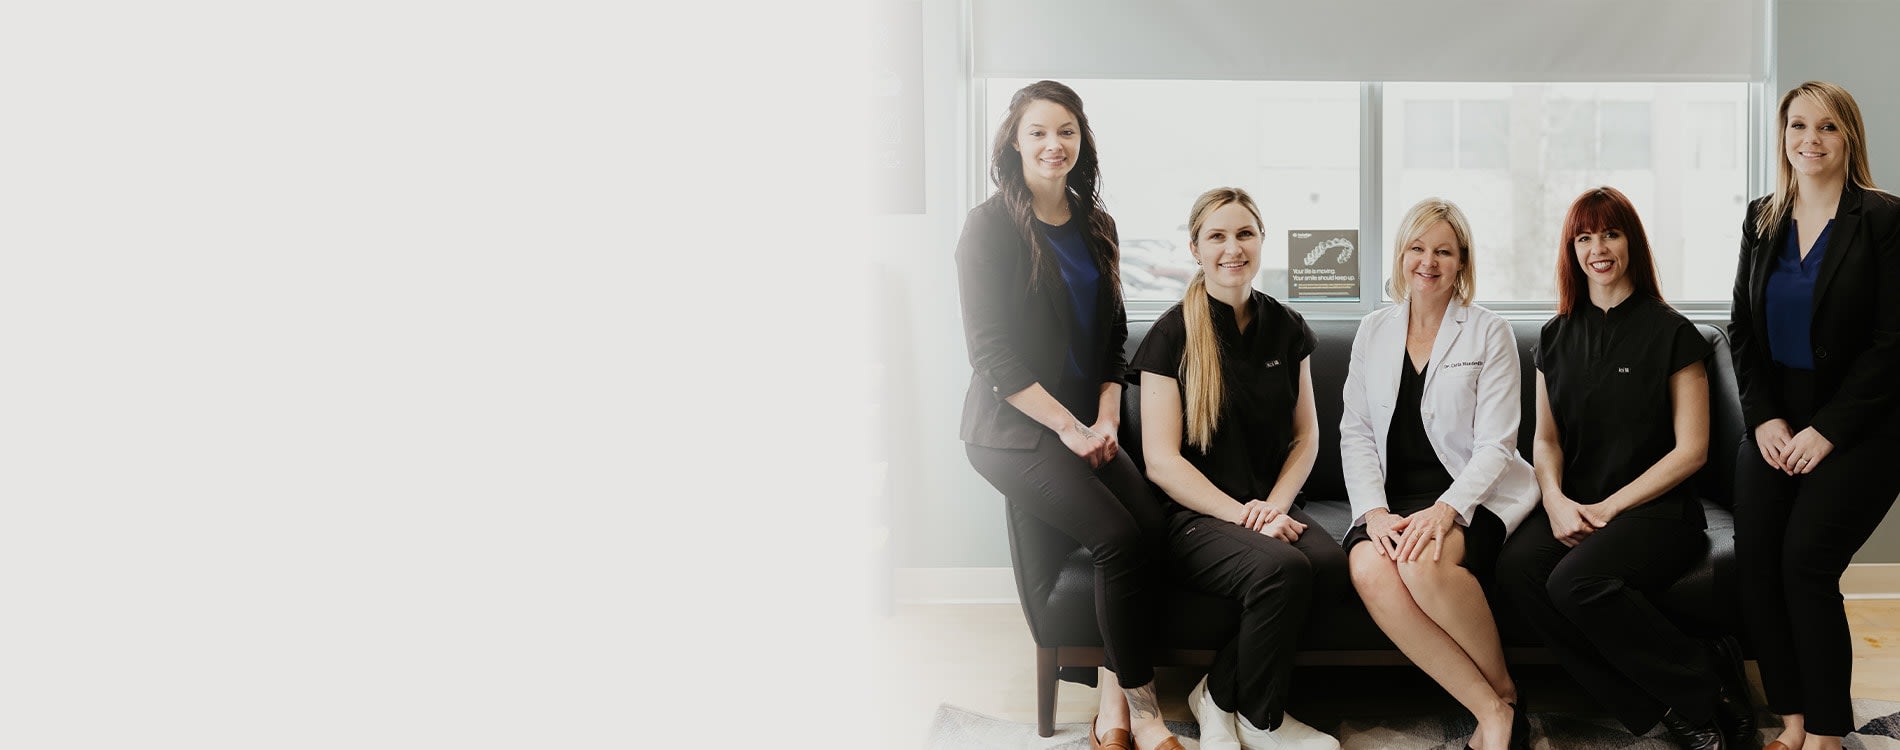 Welcoming New Patients, Okotoks Dentists